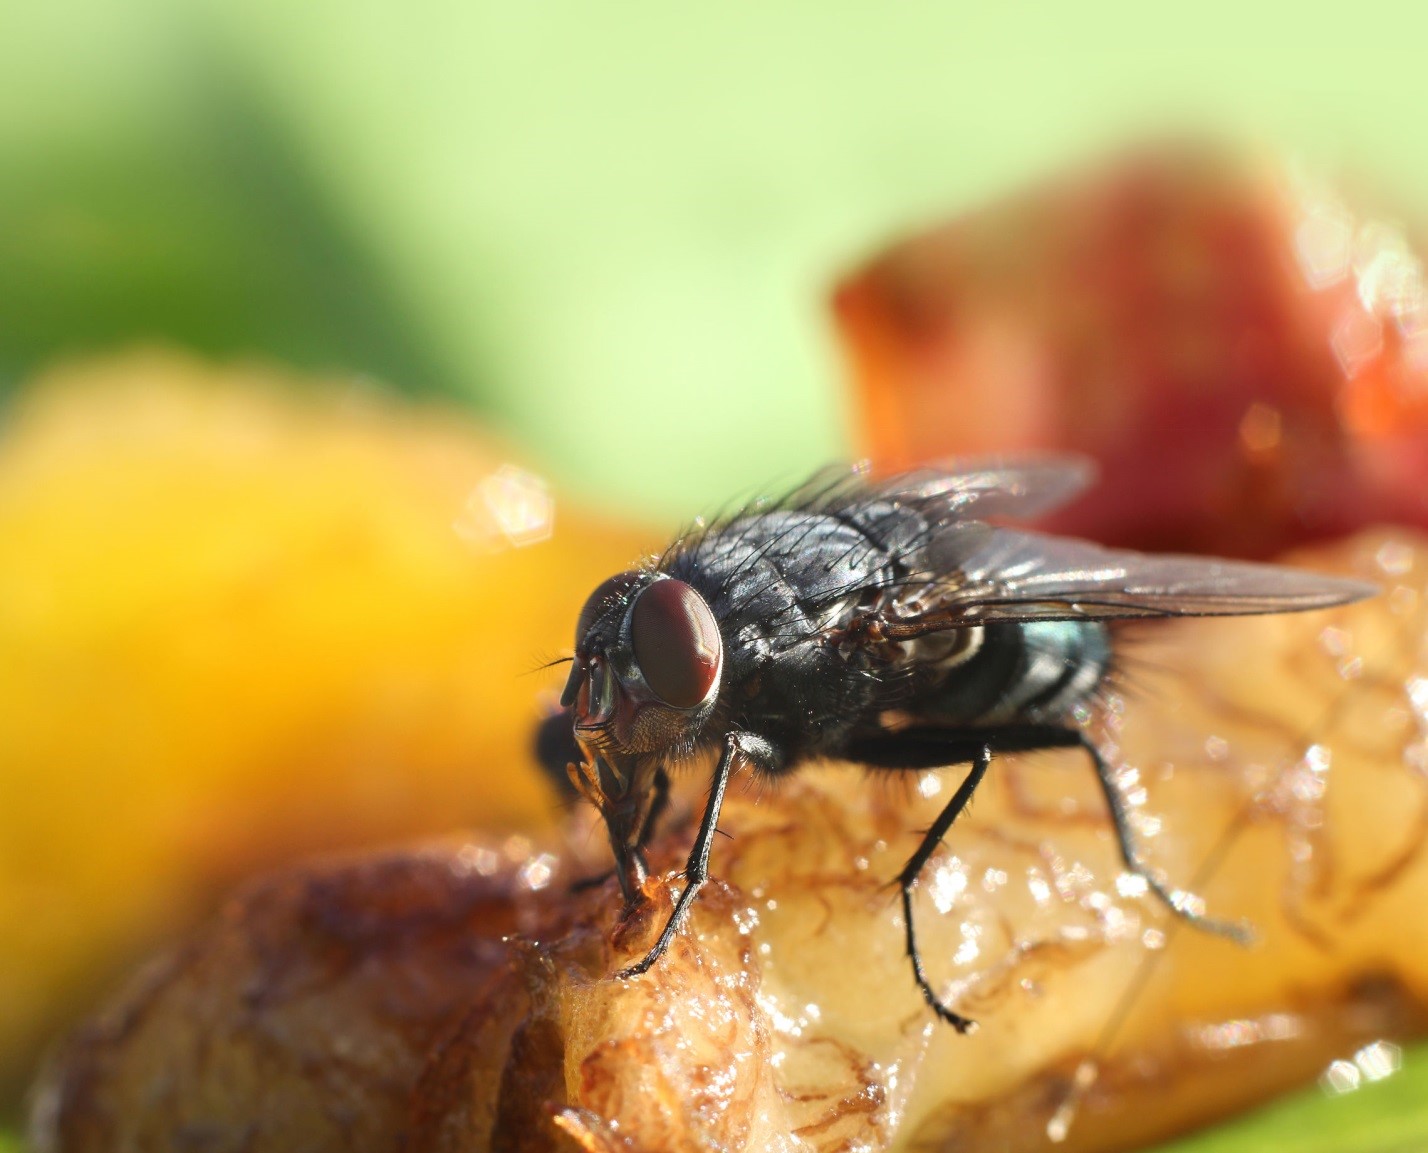 Underestimating Fly Threats Can Damage Your Business Reputation